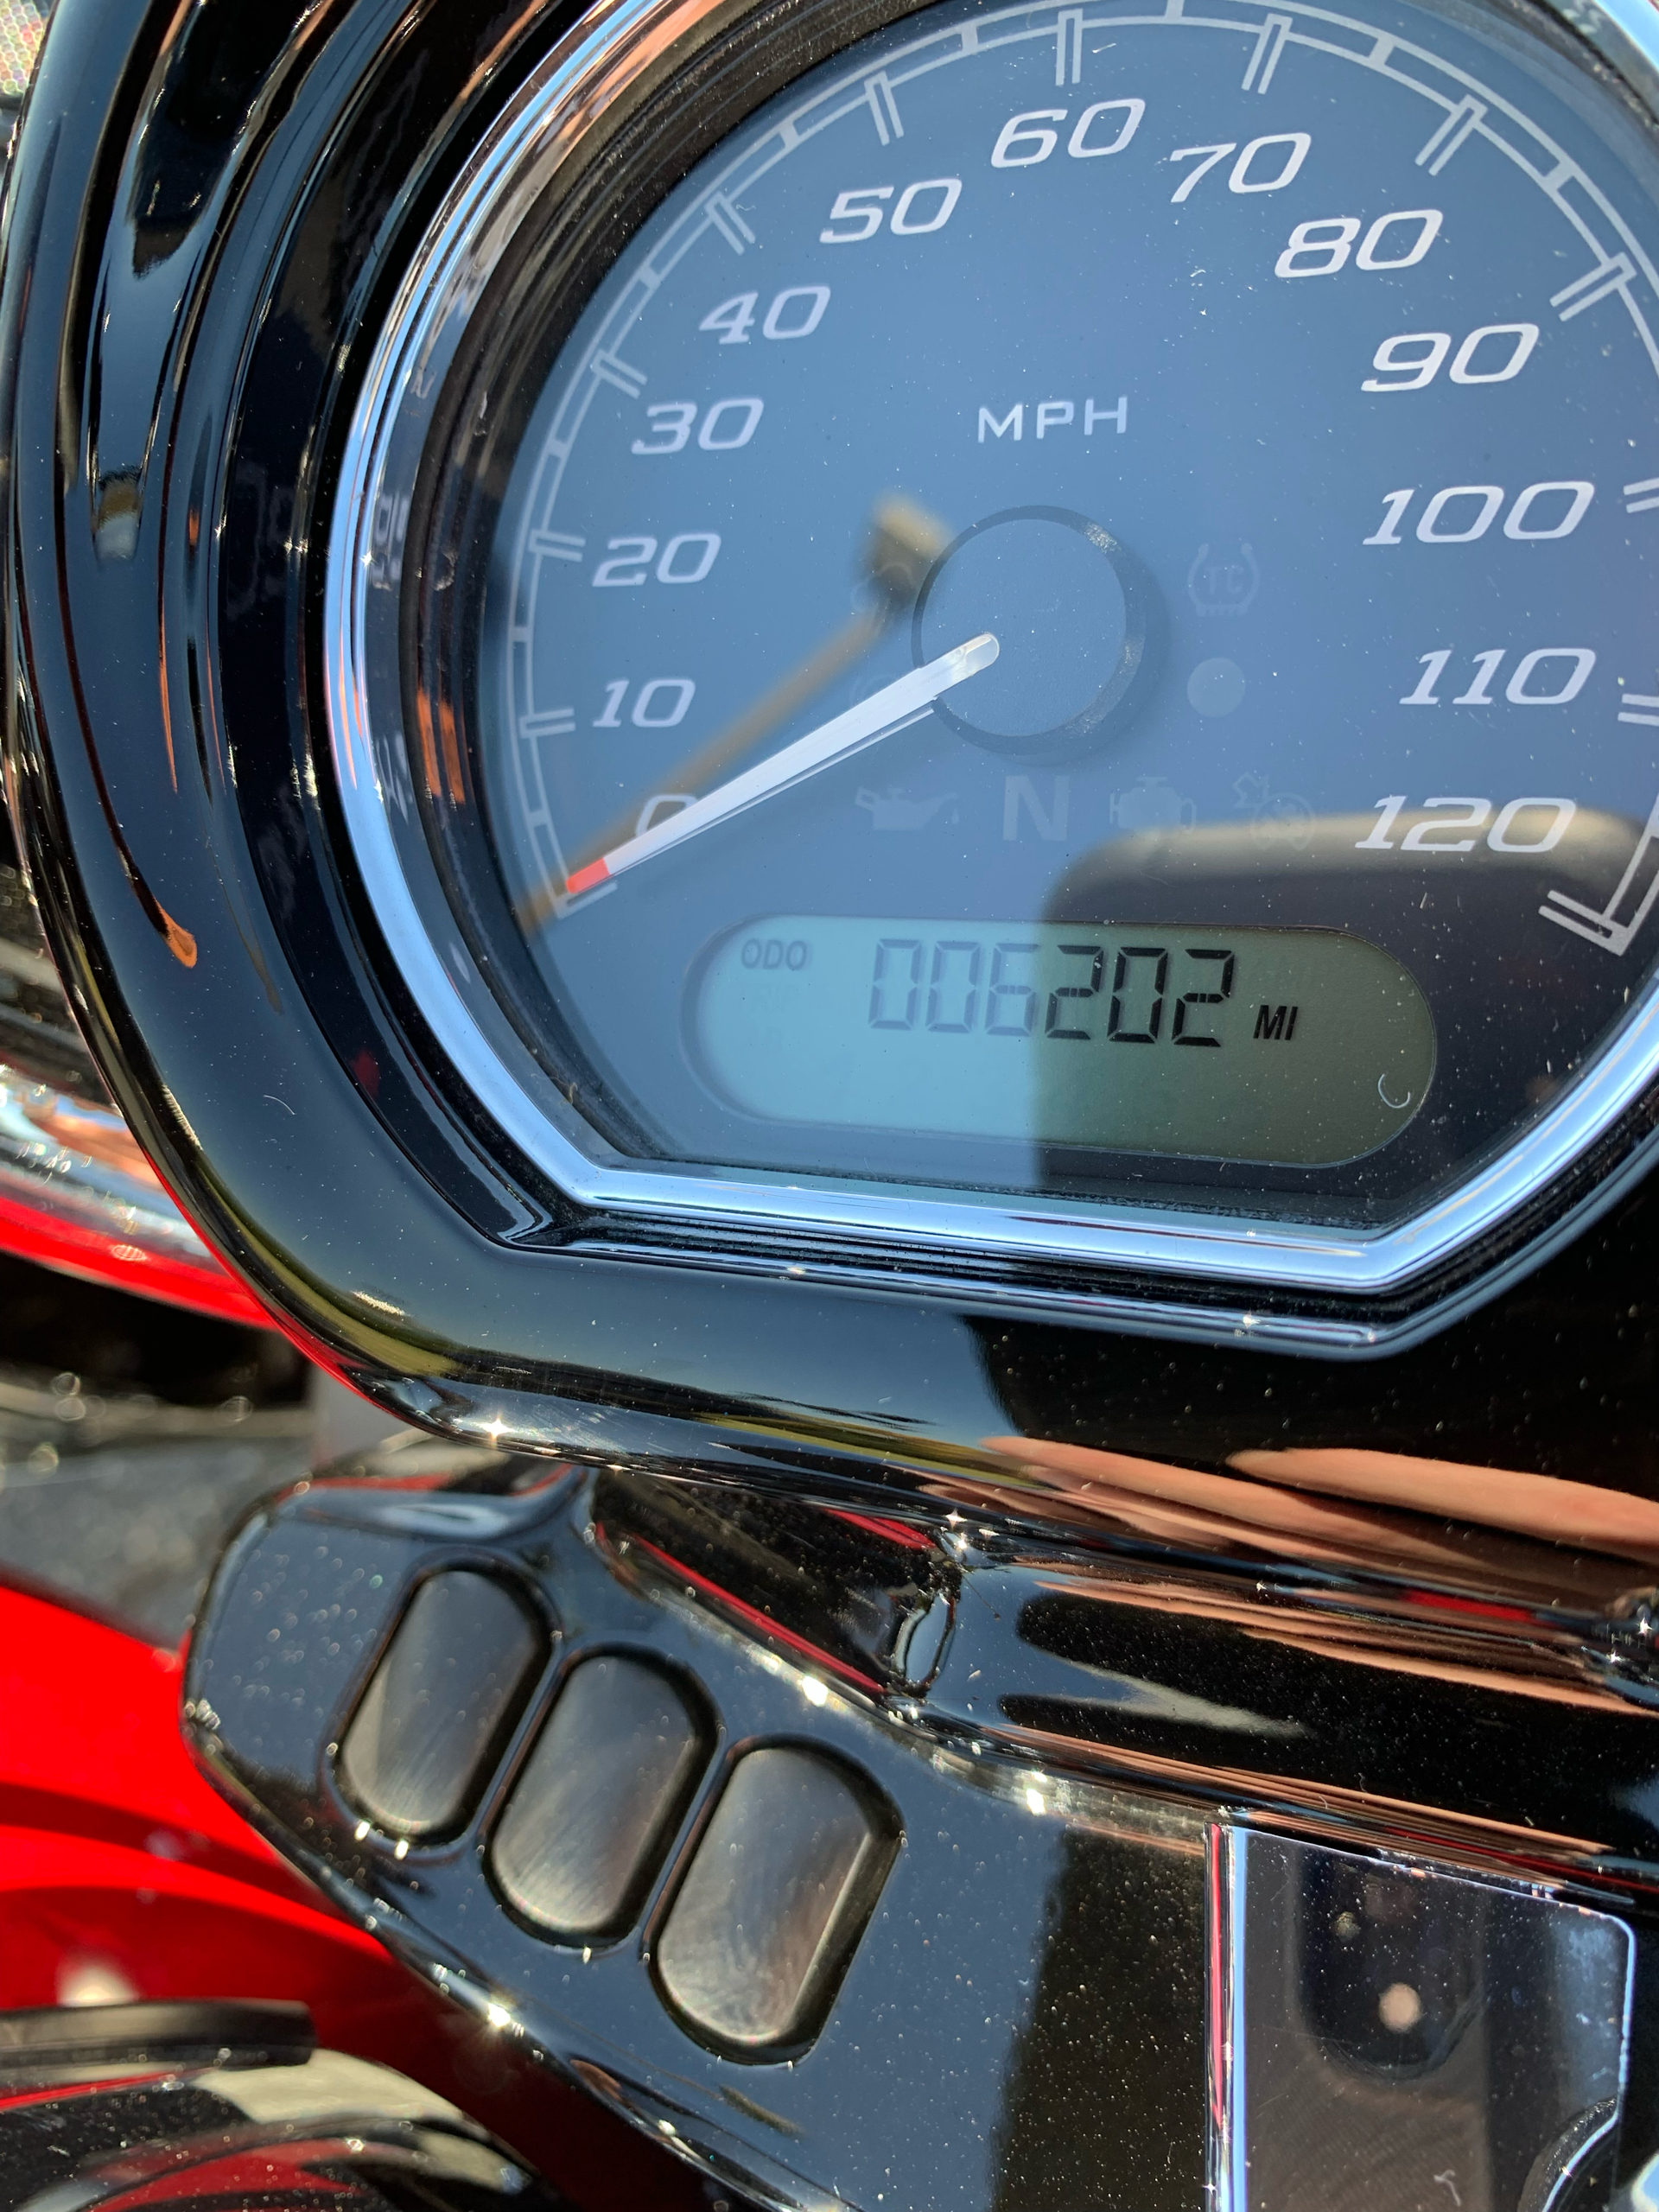 2021 Harley-Davidson Road Glide Special in Dumfries, Virginia - Photo 2